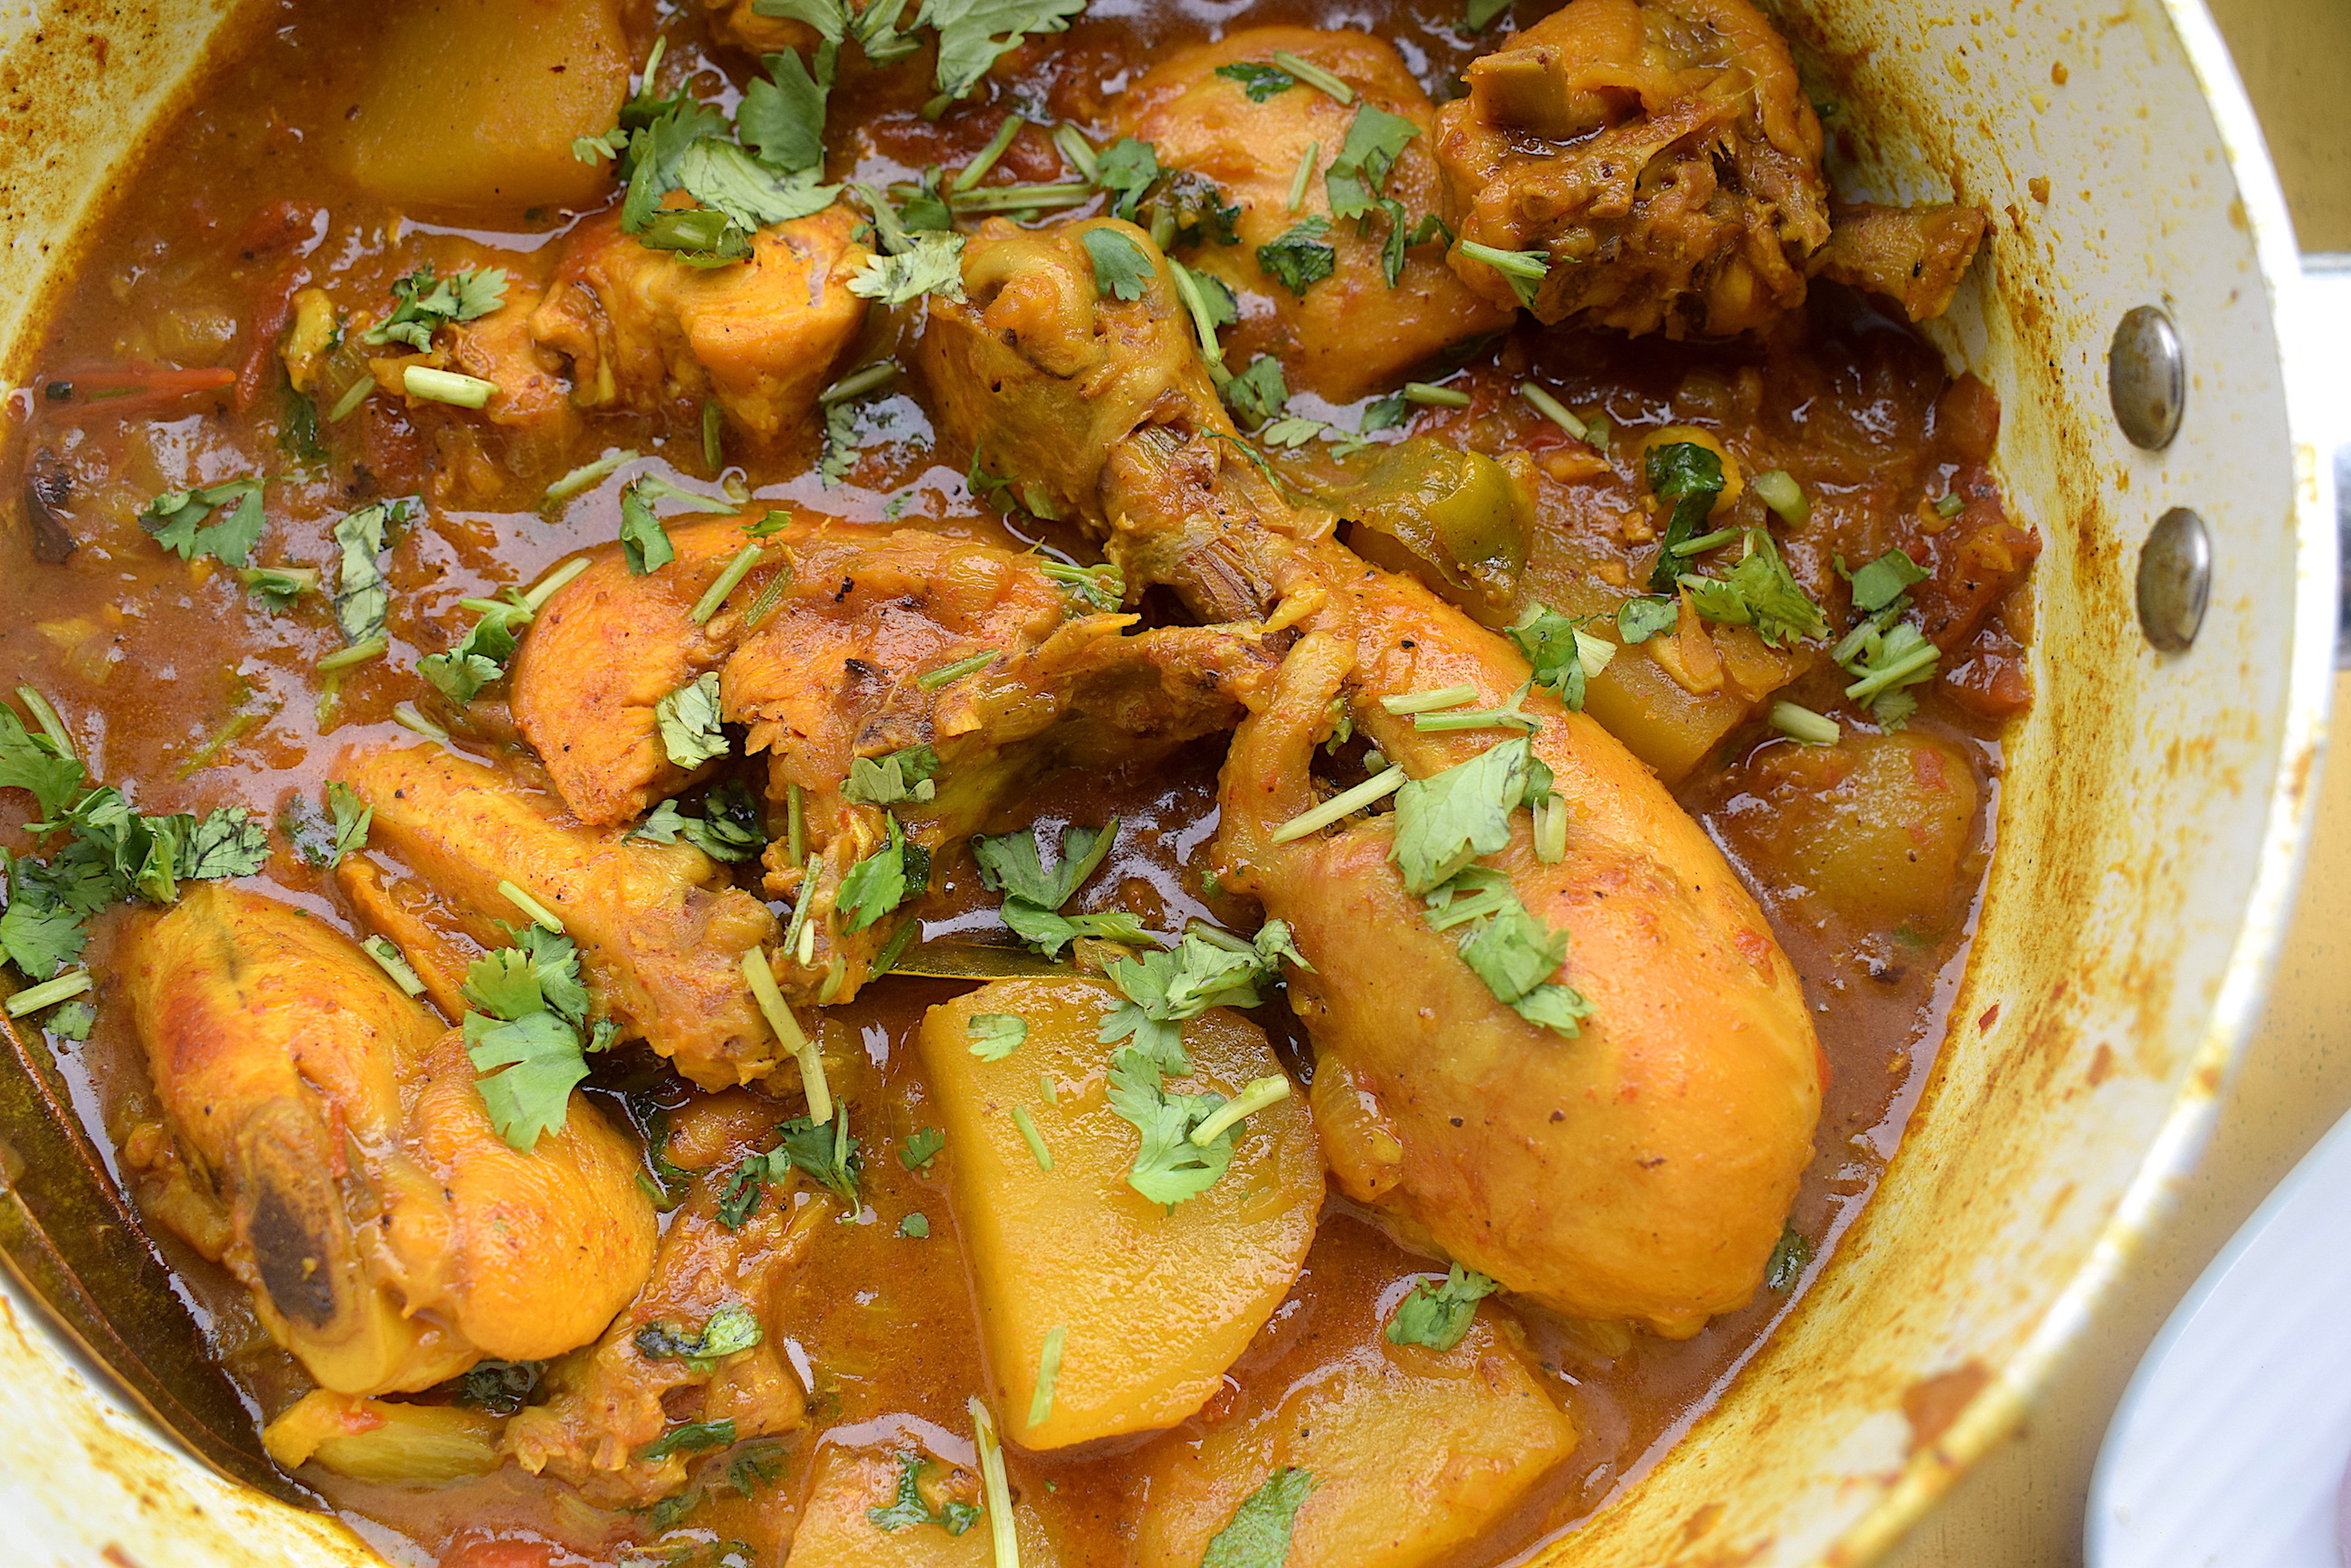 Assamese Style Chicken Curry With Chunky Potatoes Recipes For The Regular Homecook